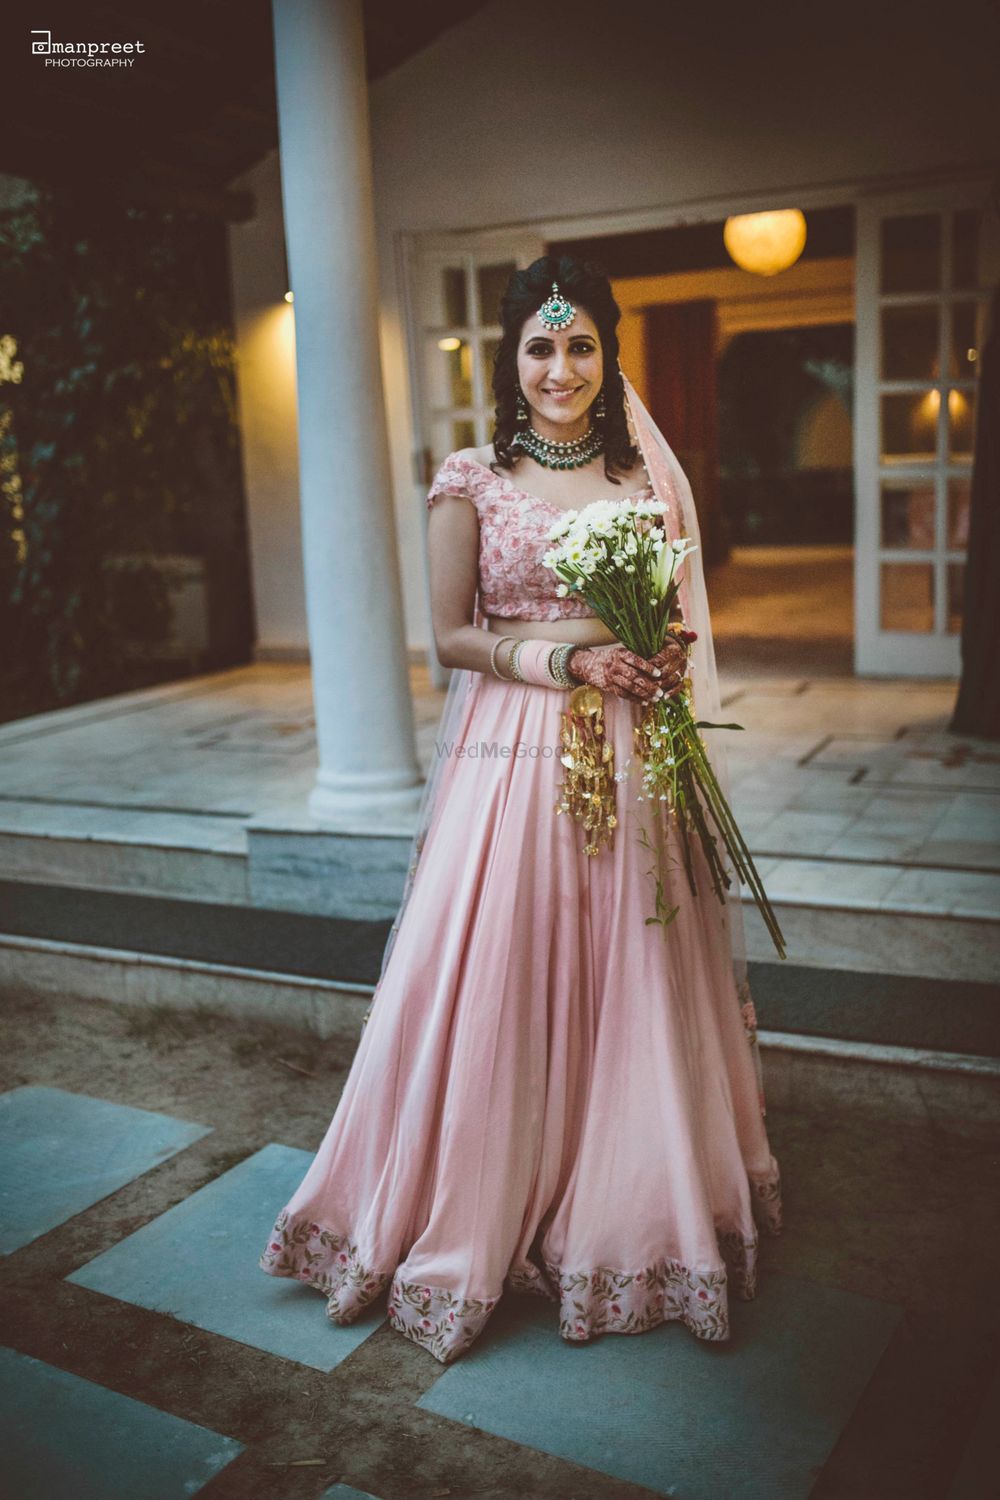 Photo of Bride in Blush Pink Bridal Lehenga with Bouquet